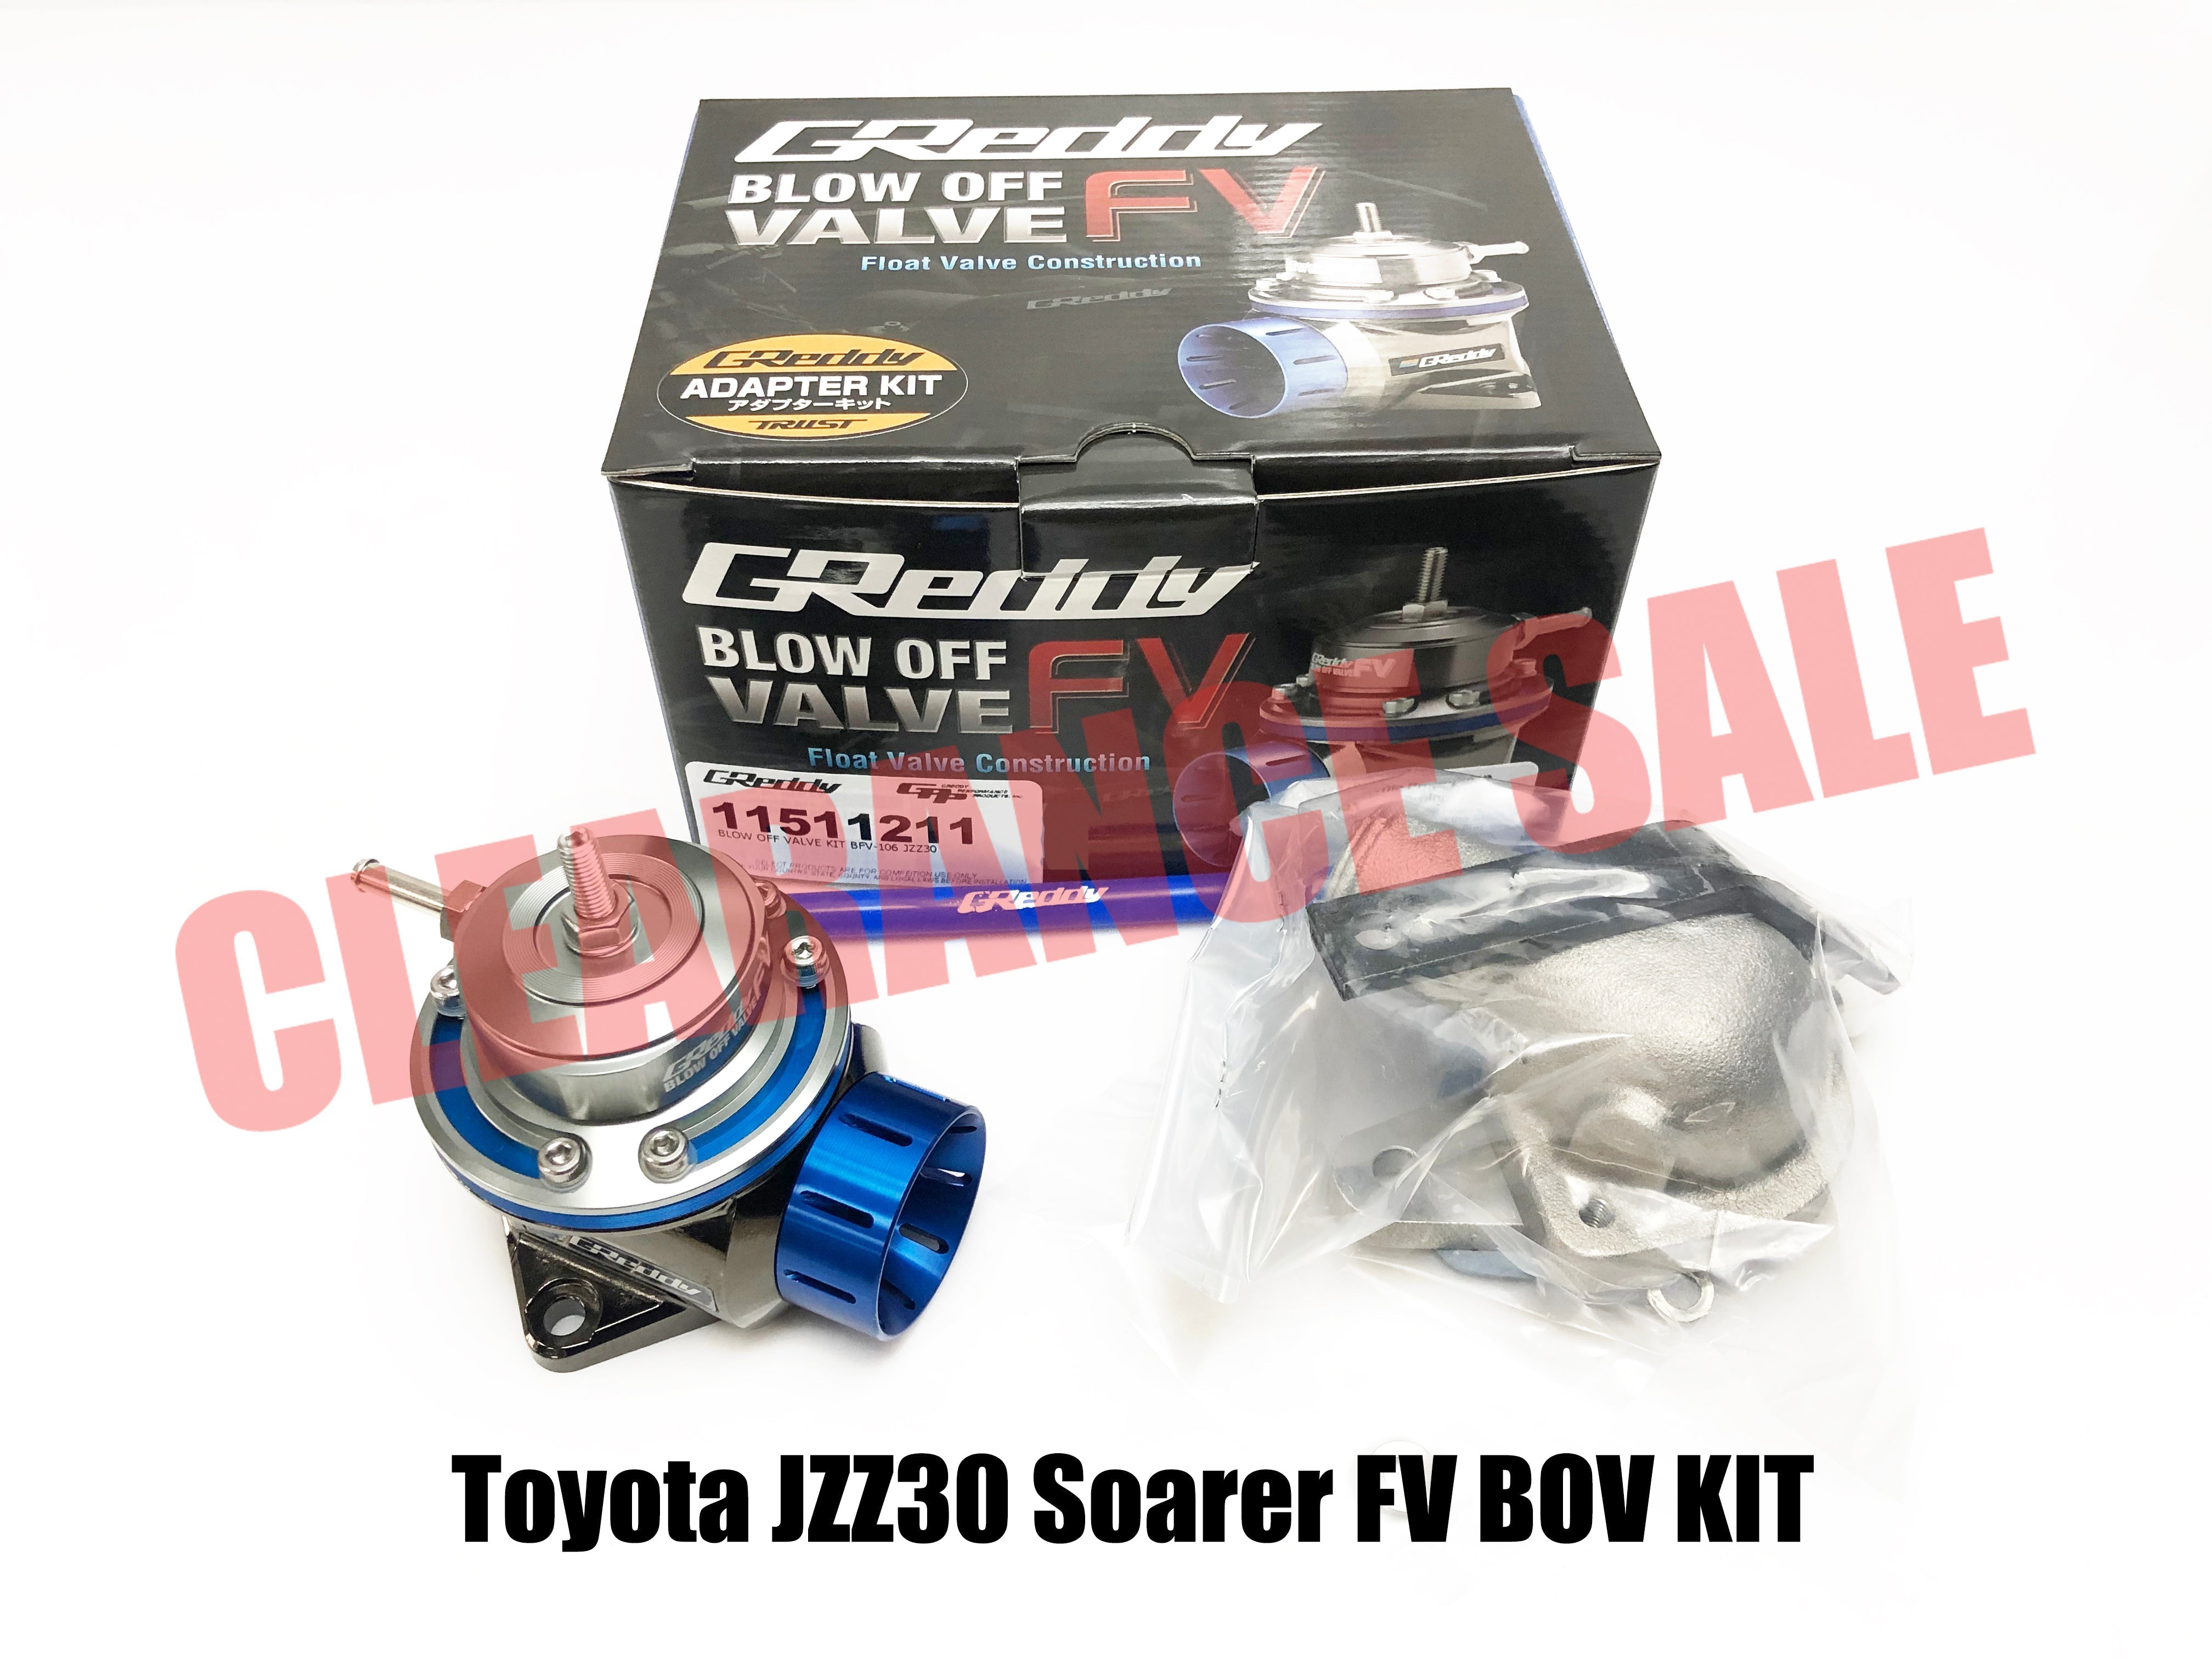 CLOSE OUT SALE - Original GReddy Type FV Blow Off Valve Adapter Sets - CLEARANCE